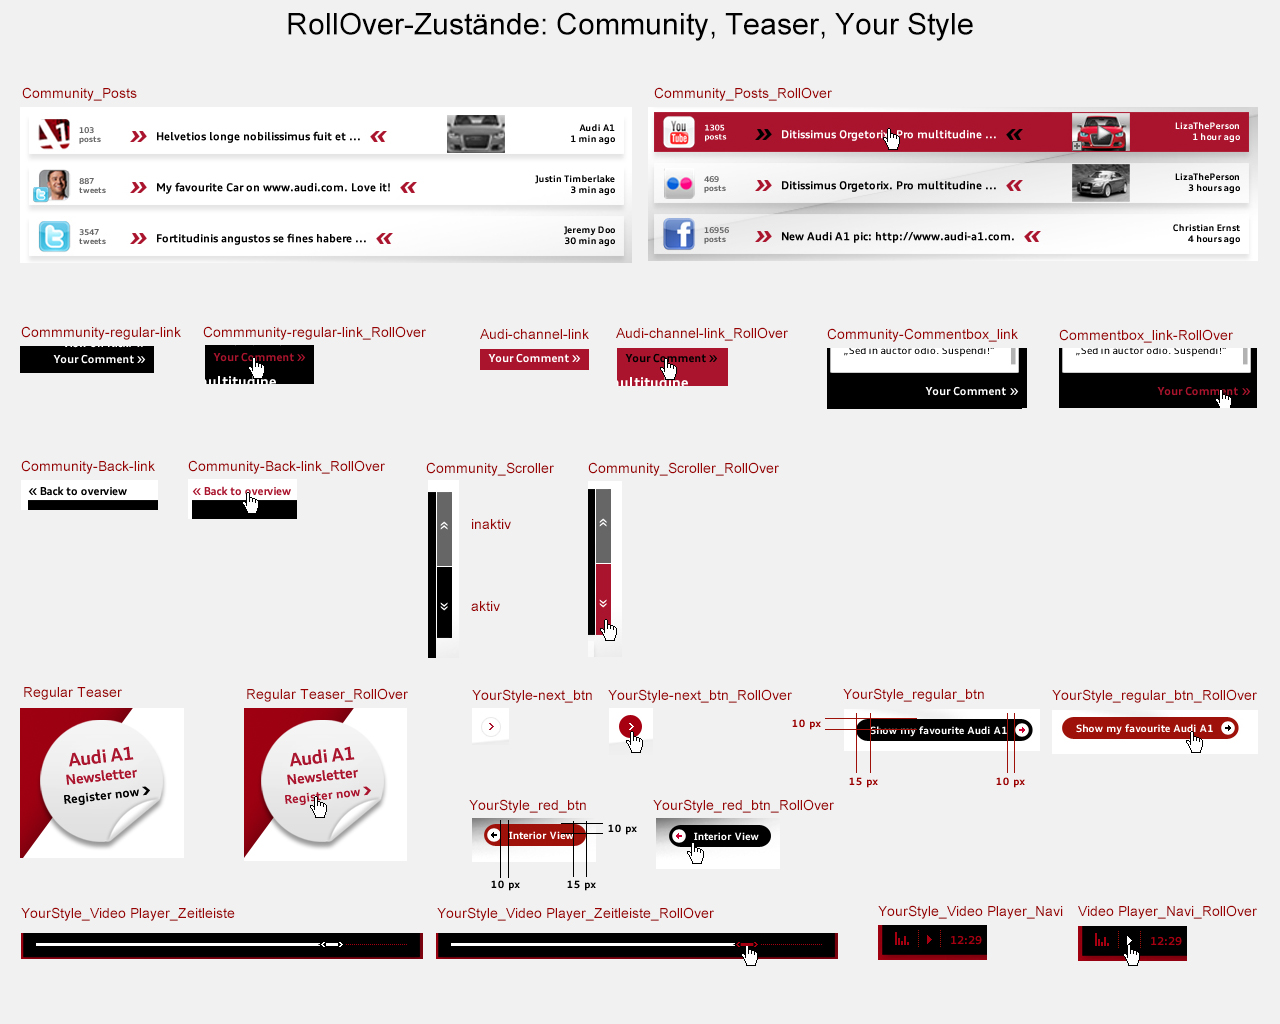 02_RollOver_guide_Community_Teaser_YourStyle